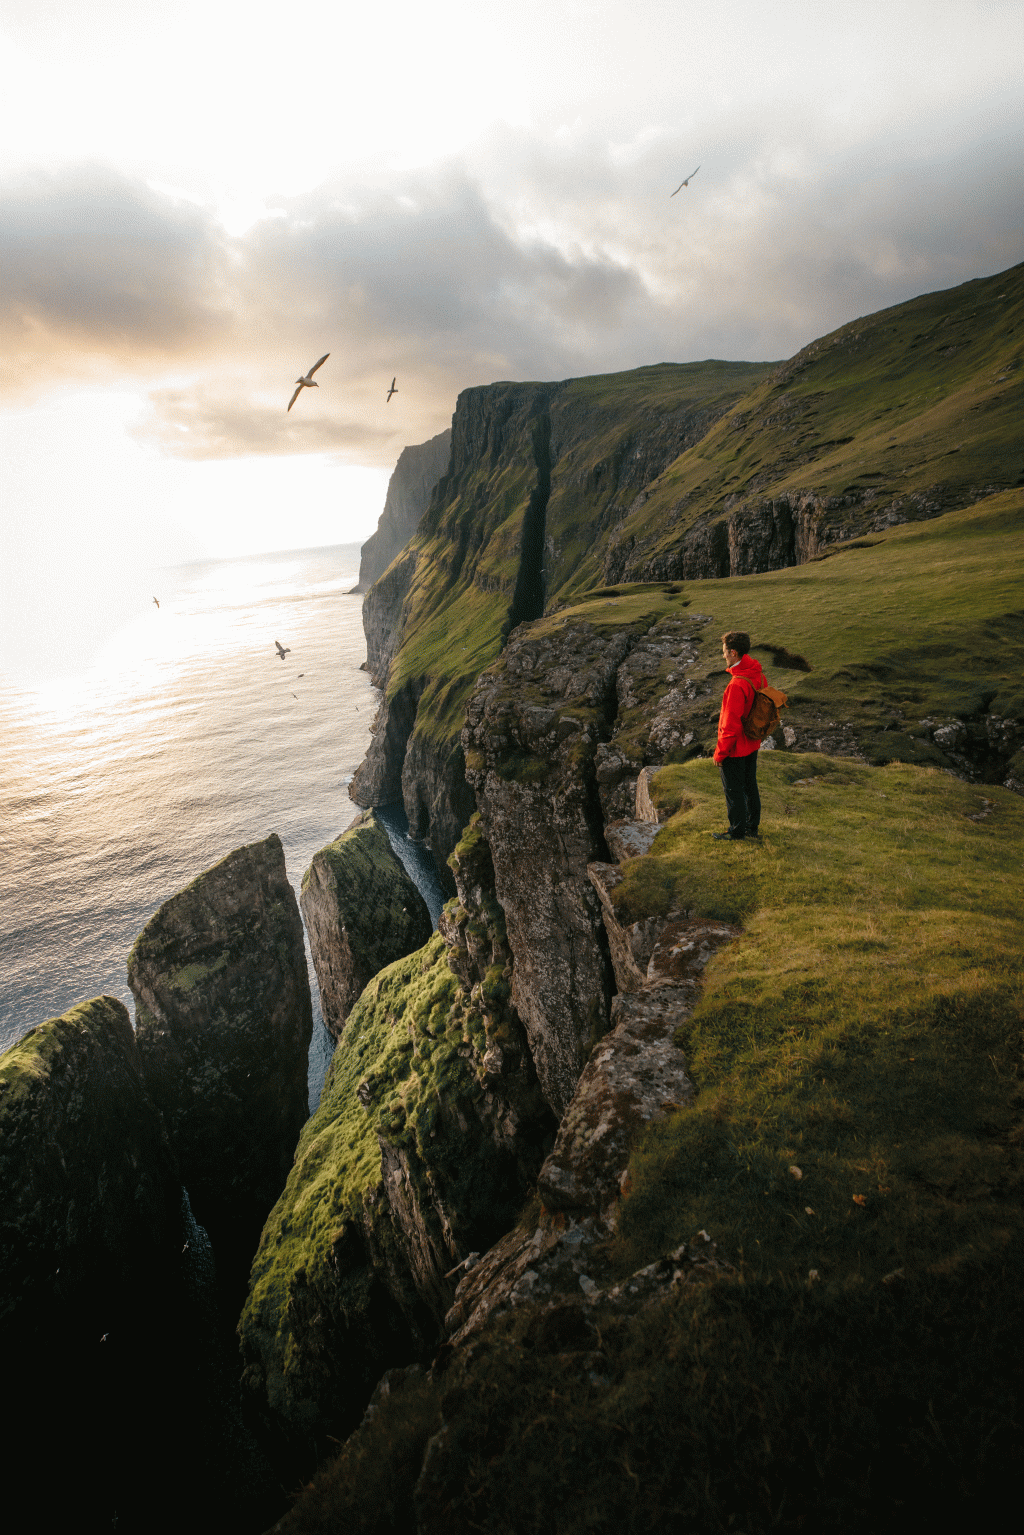 Man in red jacket wearing backpack watching birds and a sunset in the Faroe Islands